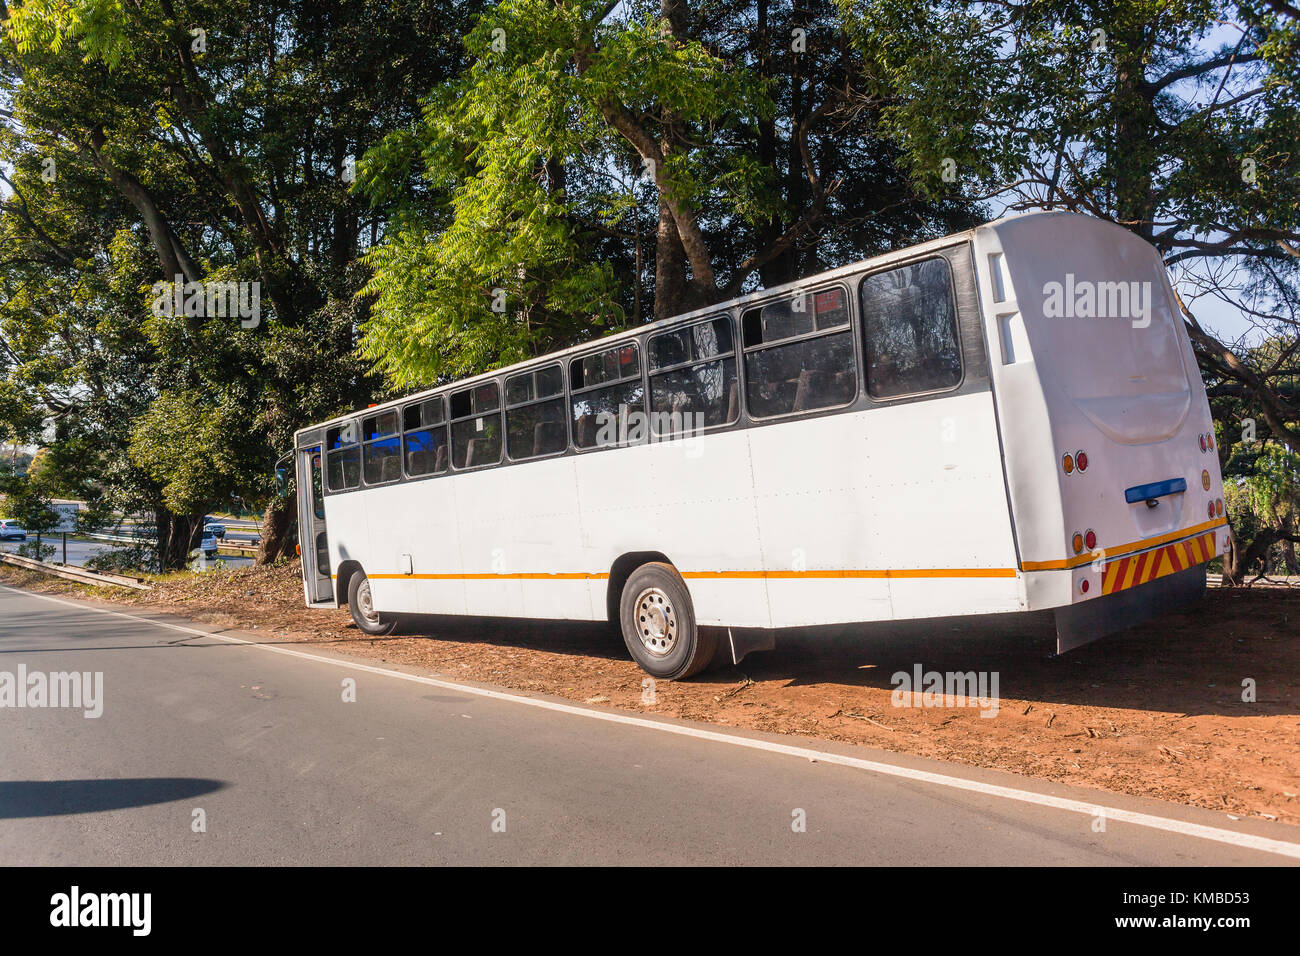 Bus passenger vehicle private business for customers transport routes. Stock Photo